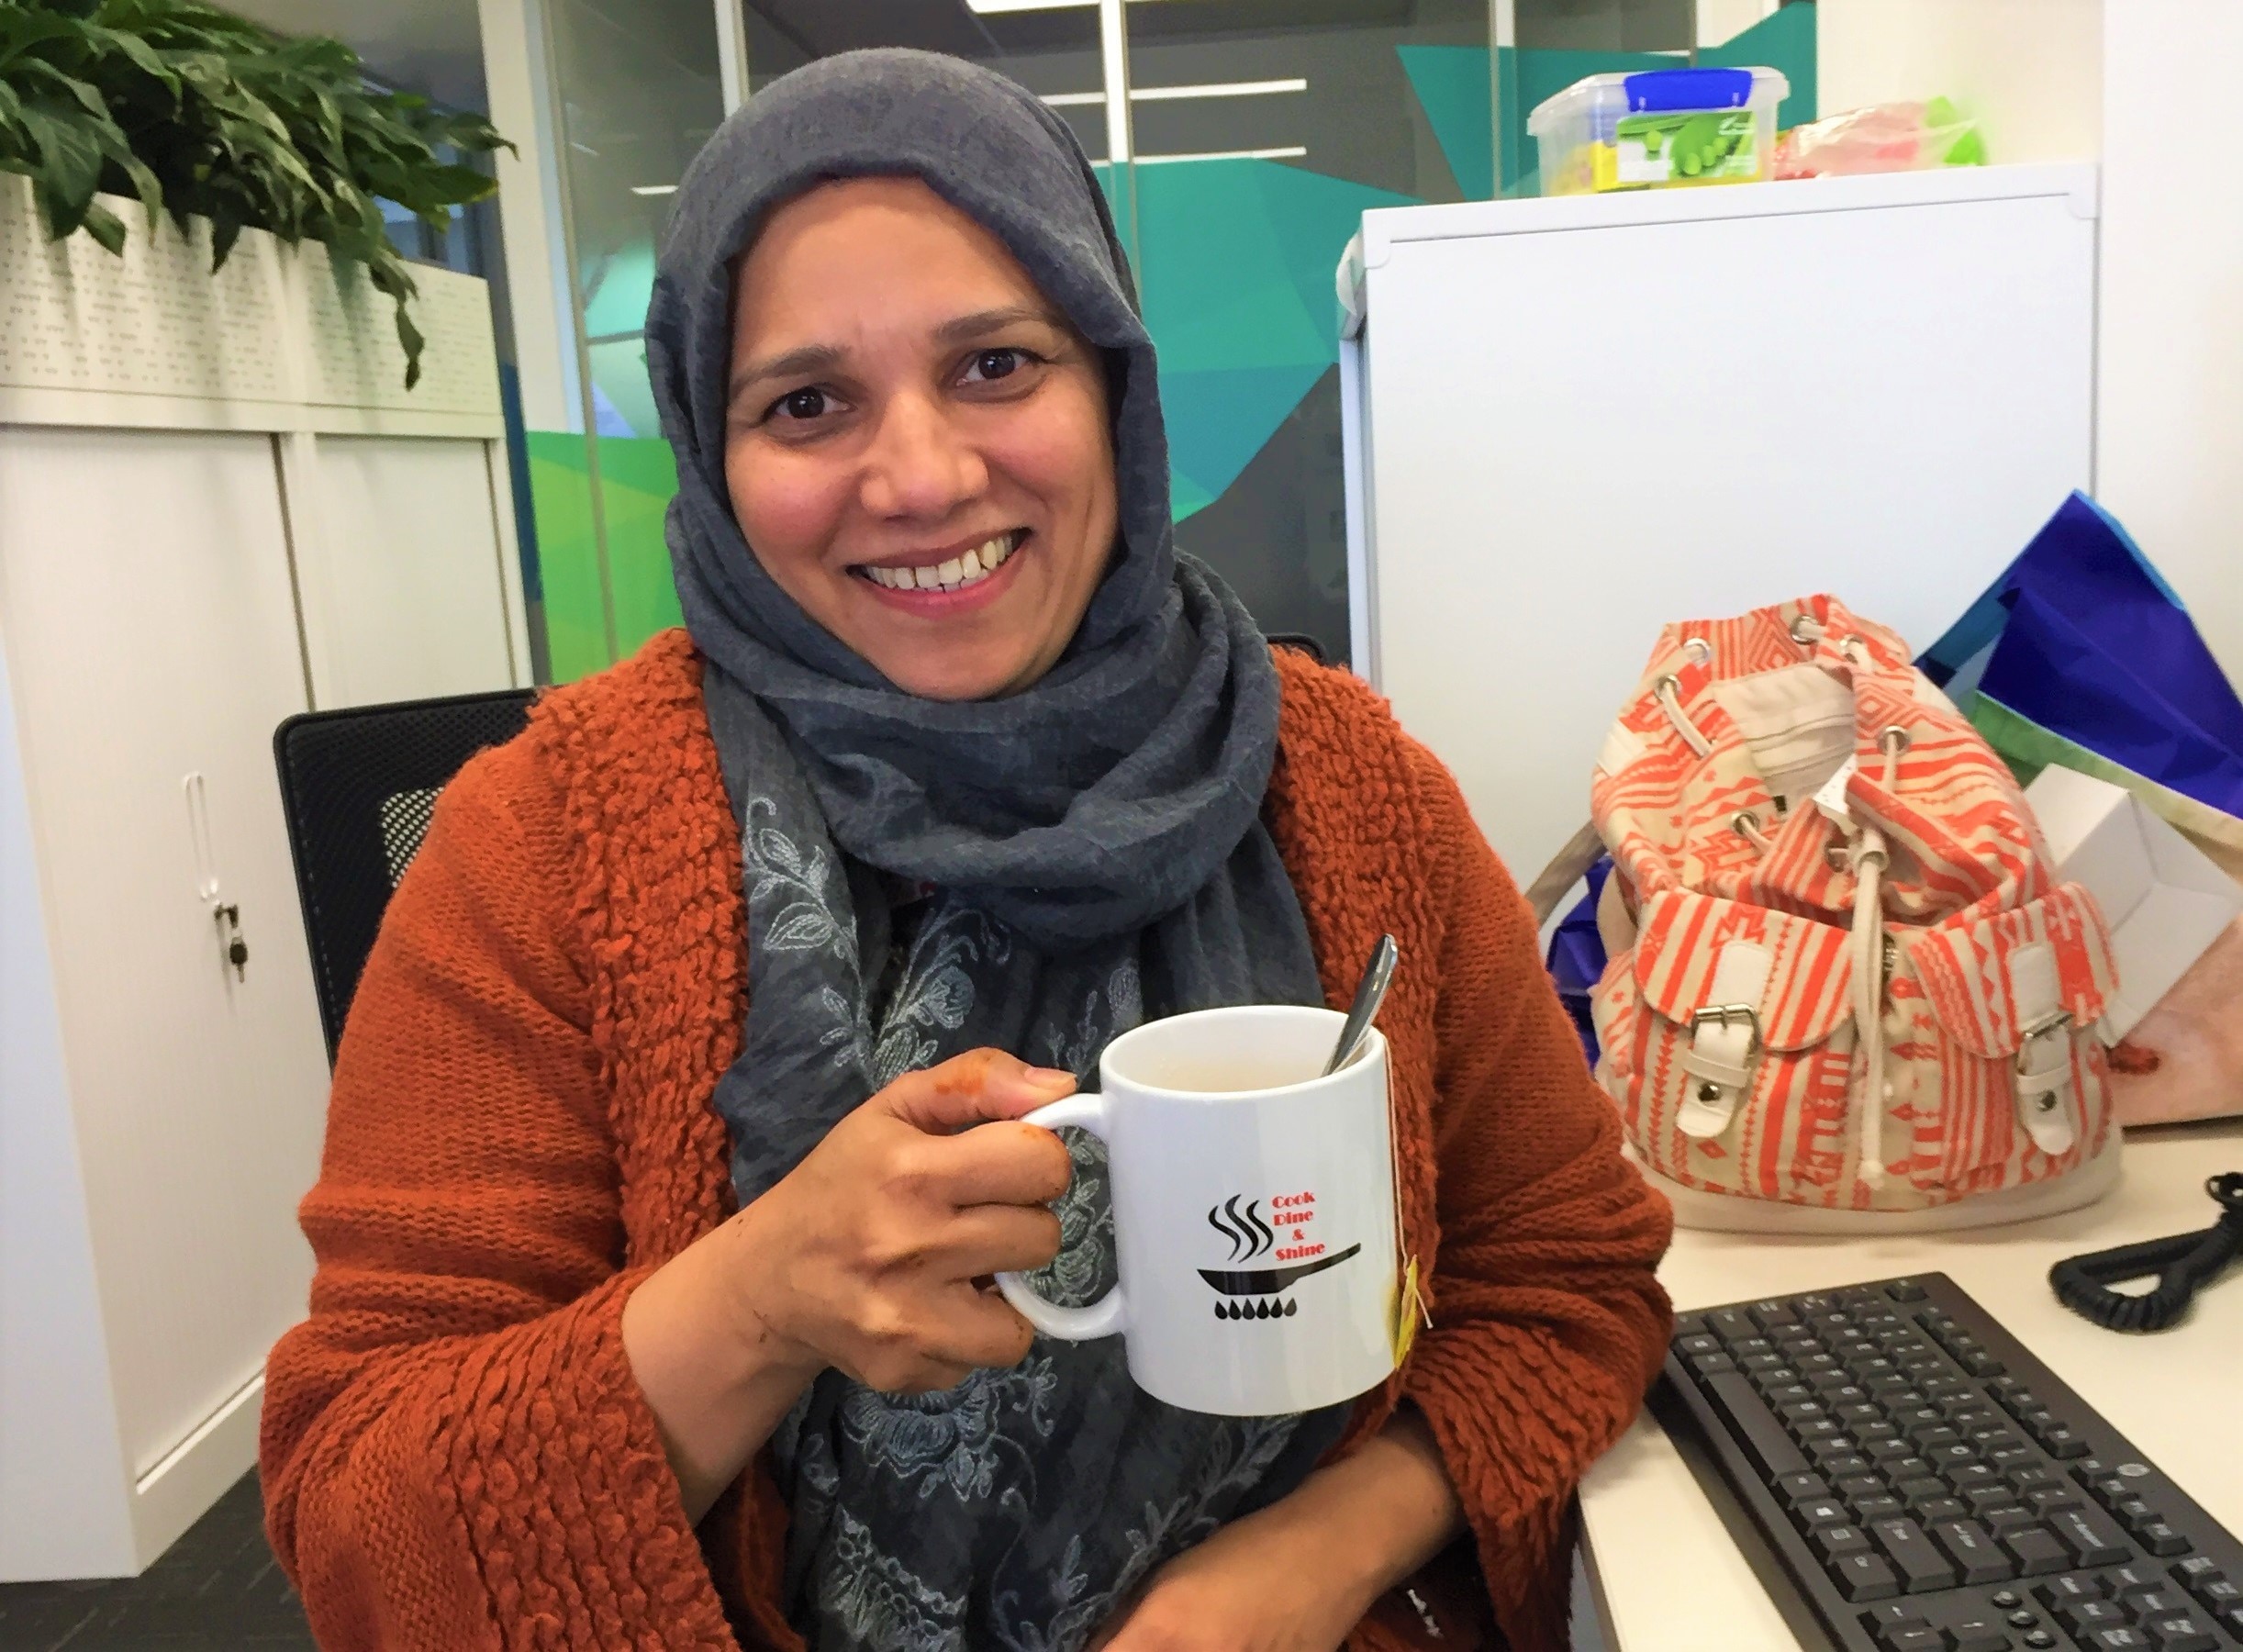 Sarwat Nauman works as a community engagement officer and help new migrant women.